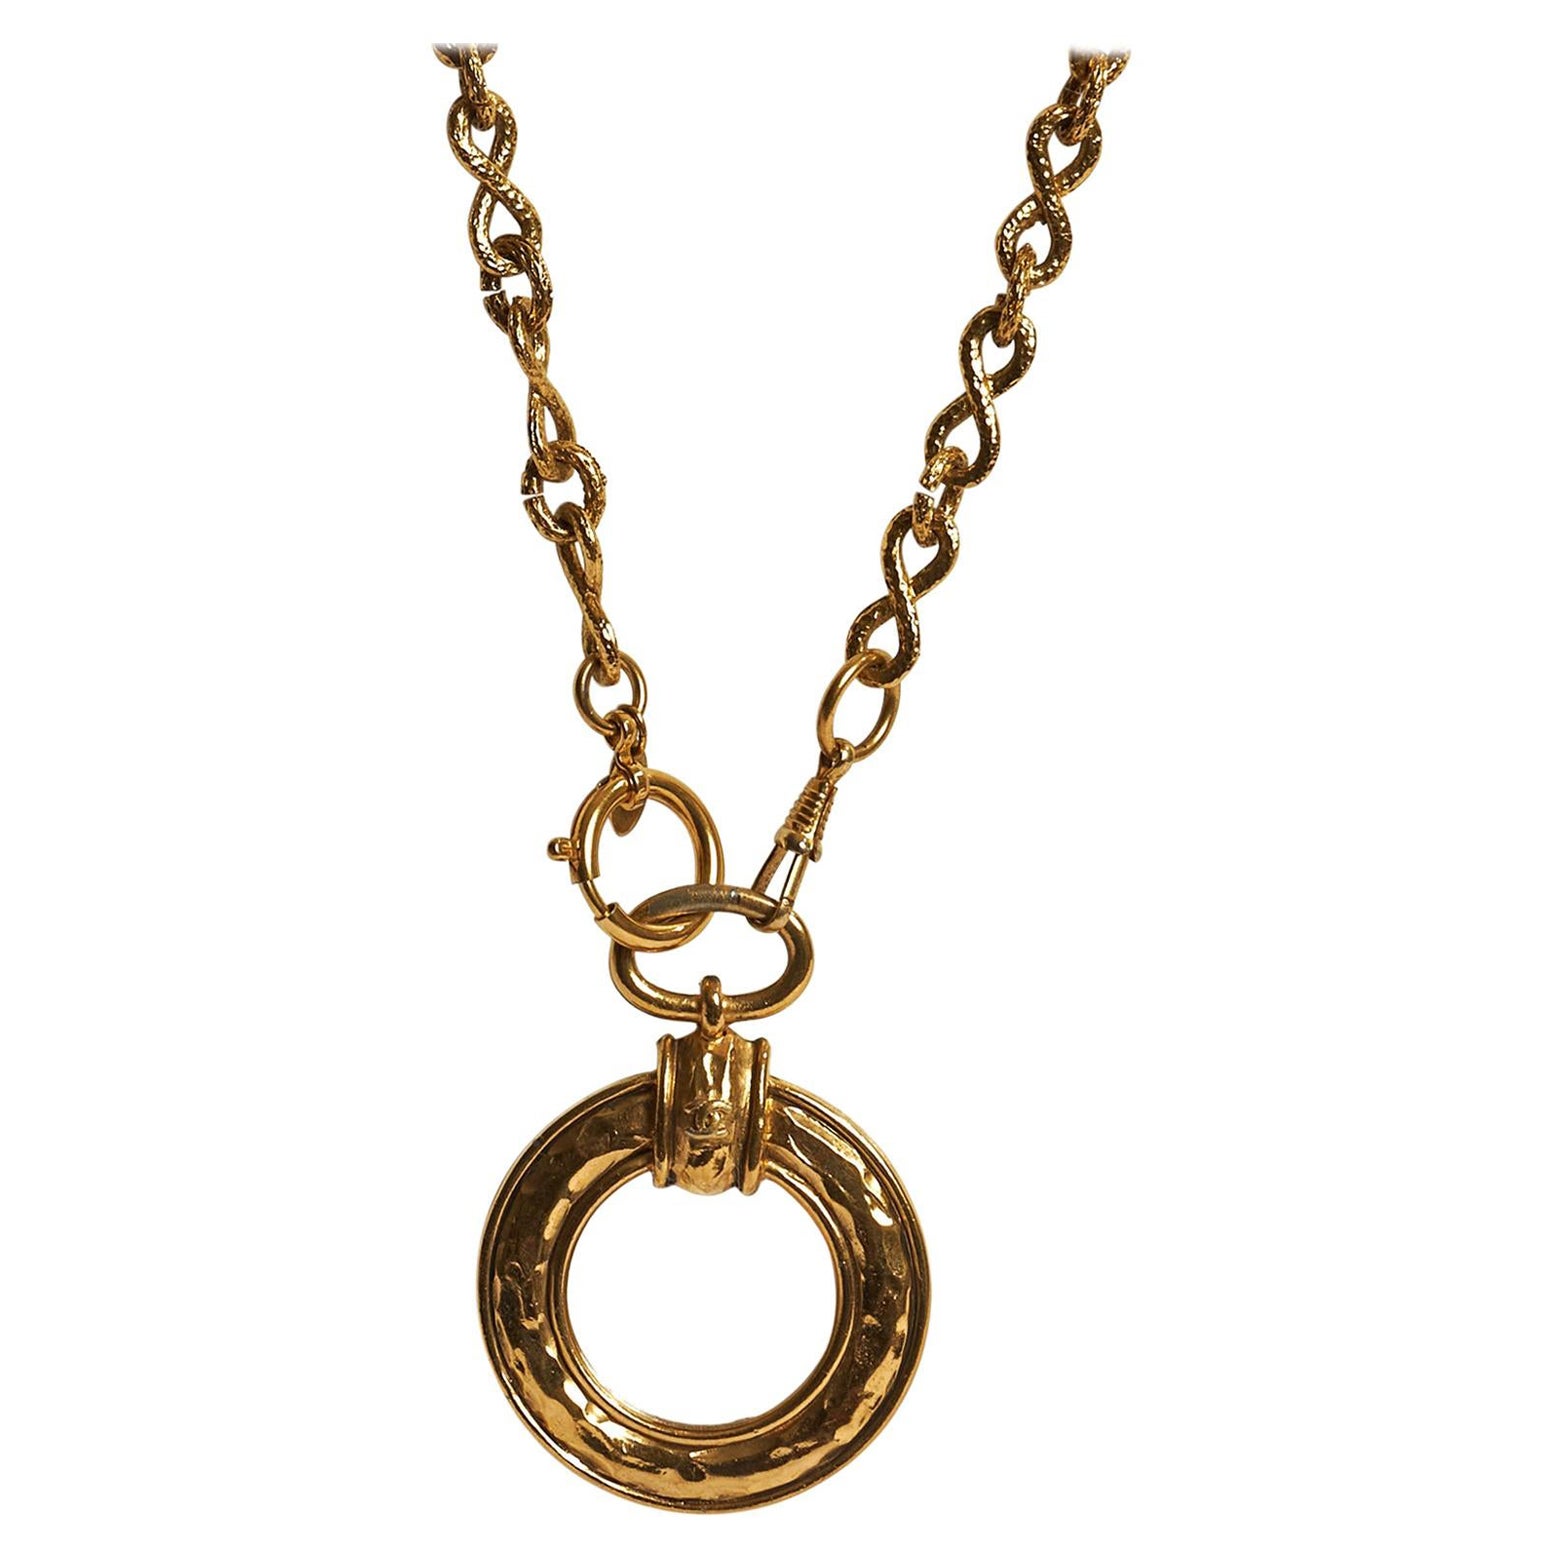 1980s Chanel hammered gold tone fancy chain magnifier necklace. Can be worn single or double. Comes with original duster or box. Pendant: Diameter 2